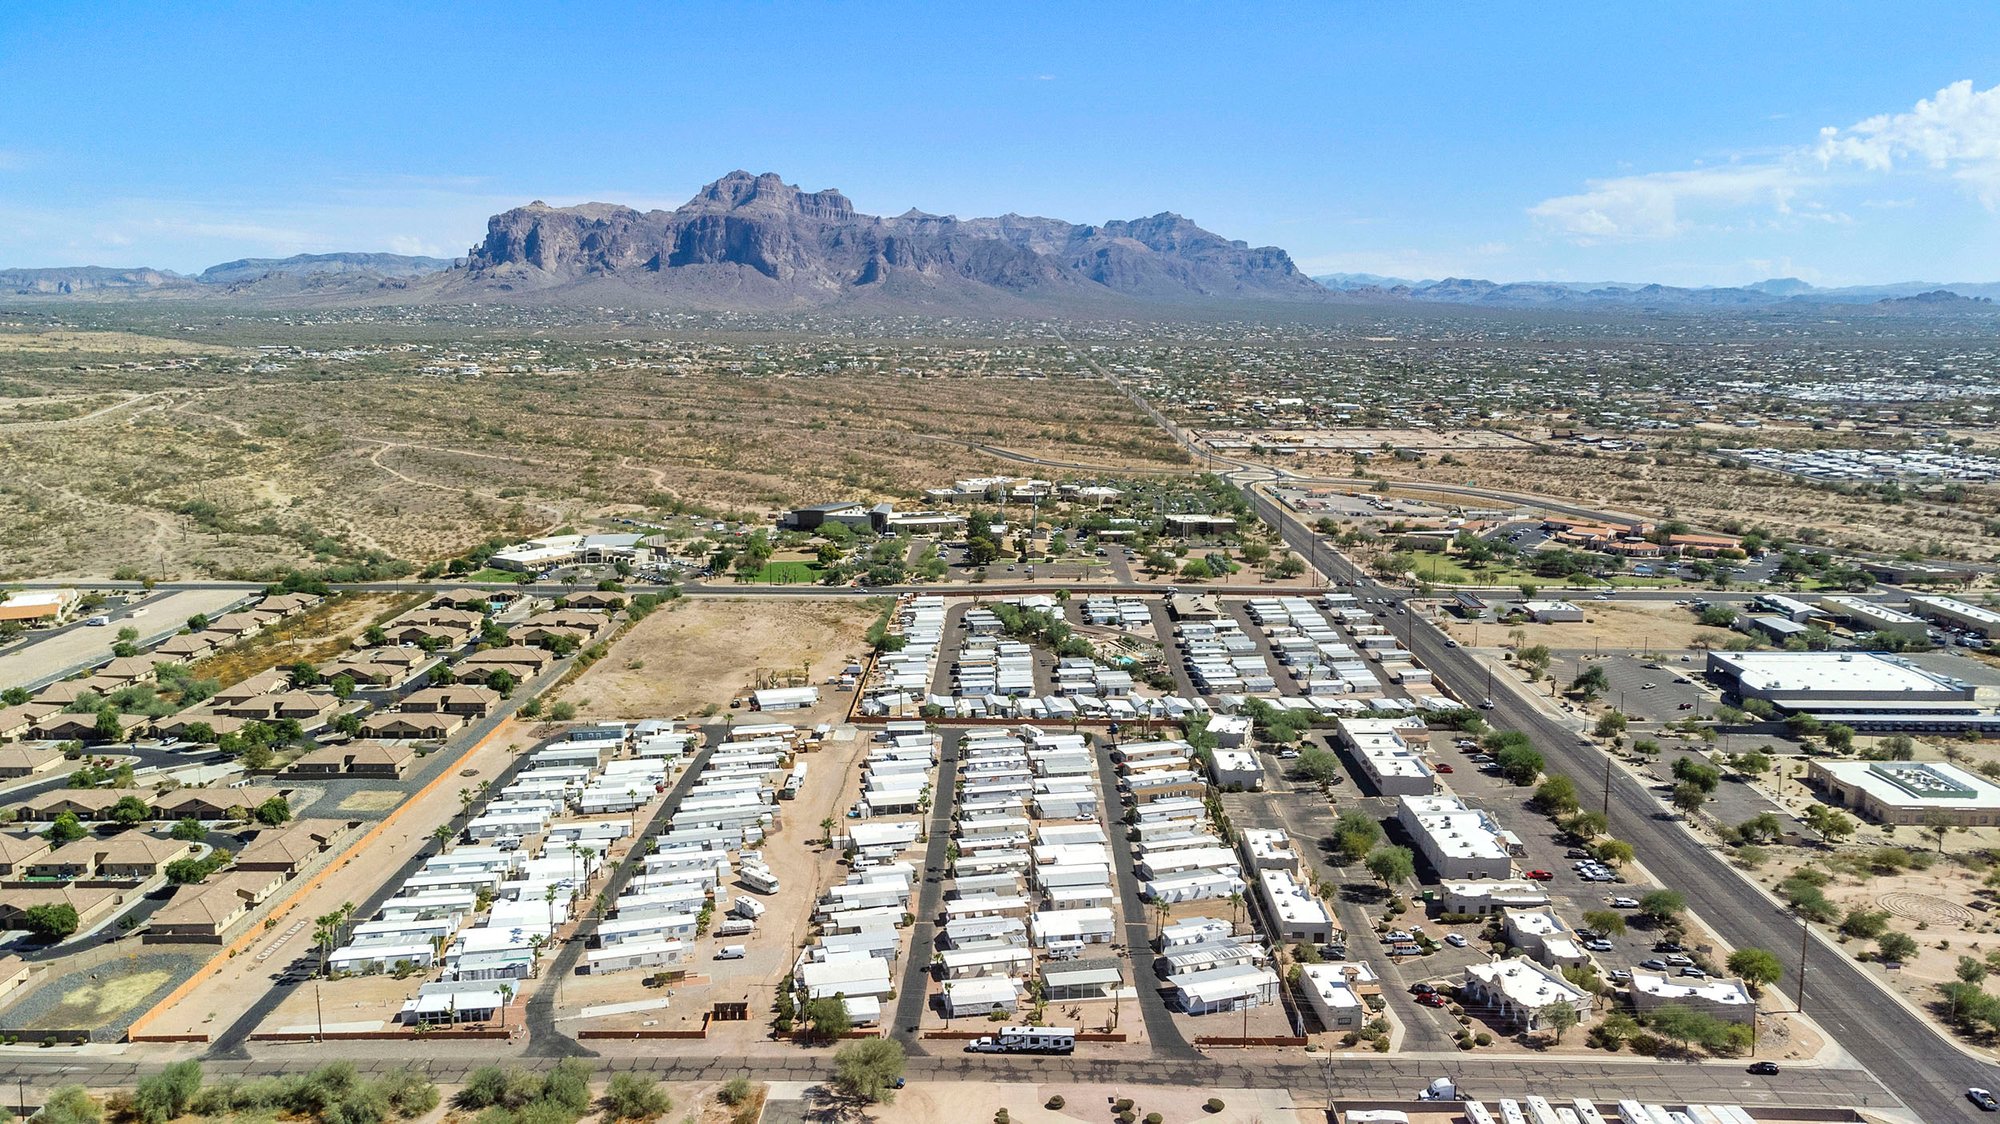 Chaparral Ranch Aerial Picture of Affordable Homes in RV Manufactured Housing Community